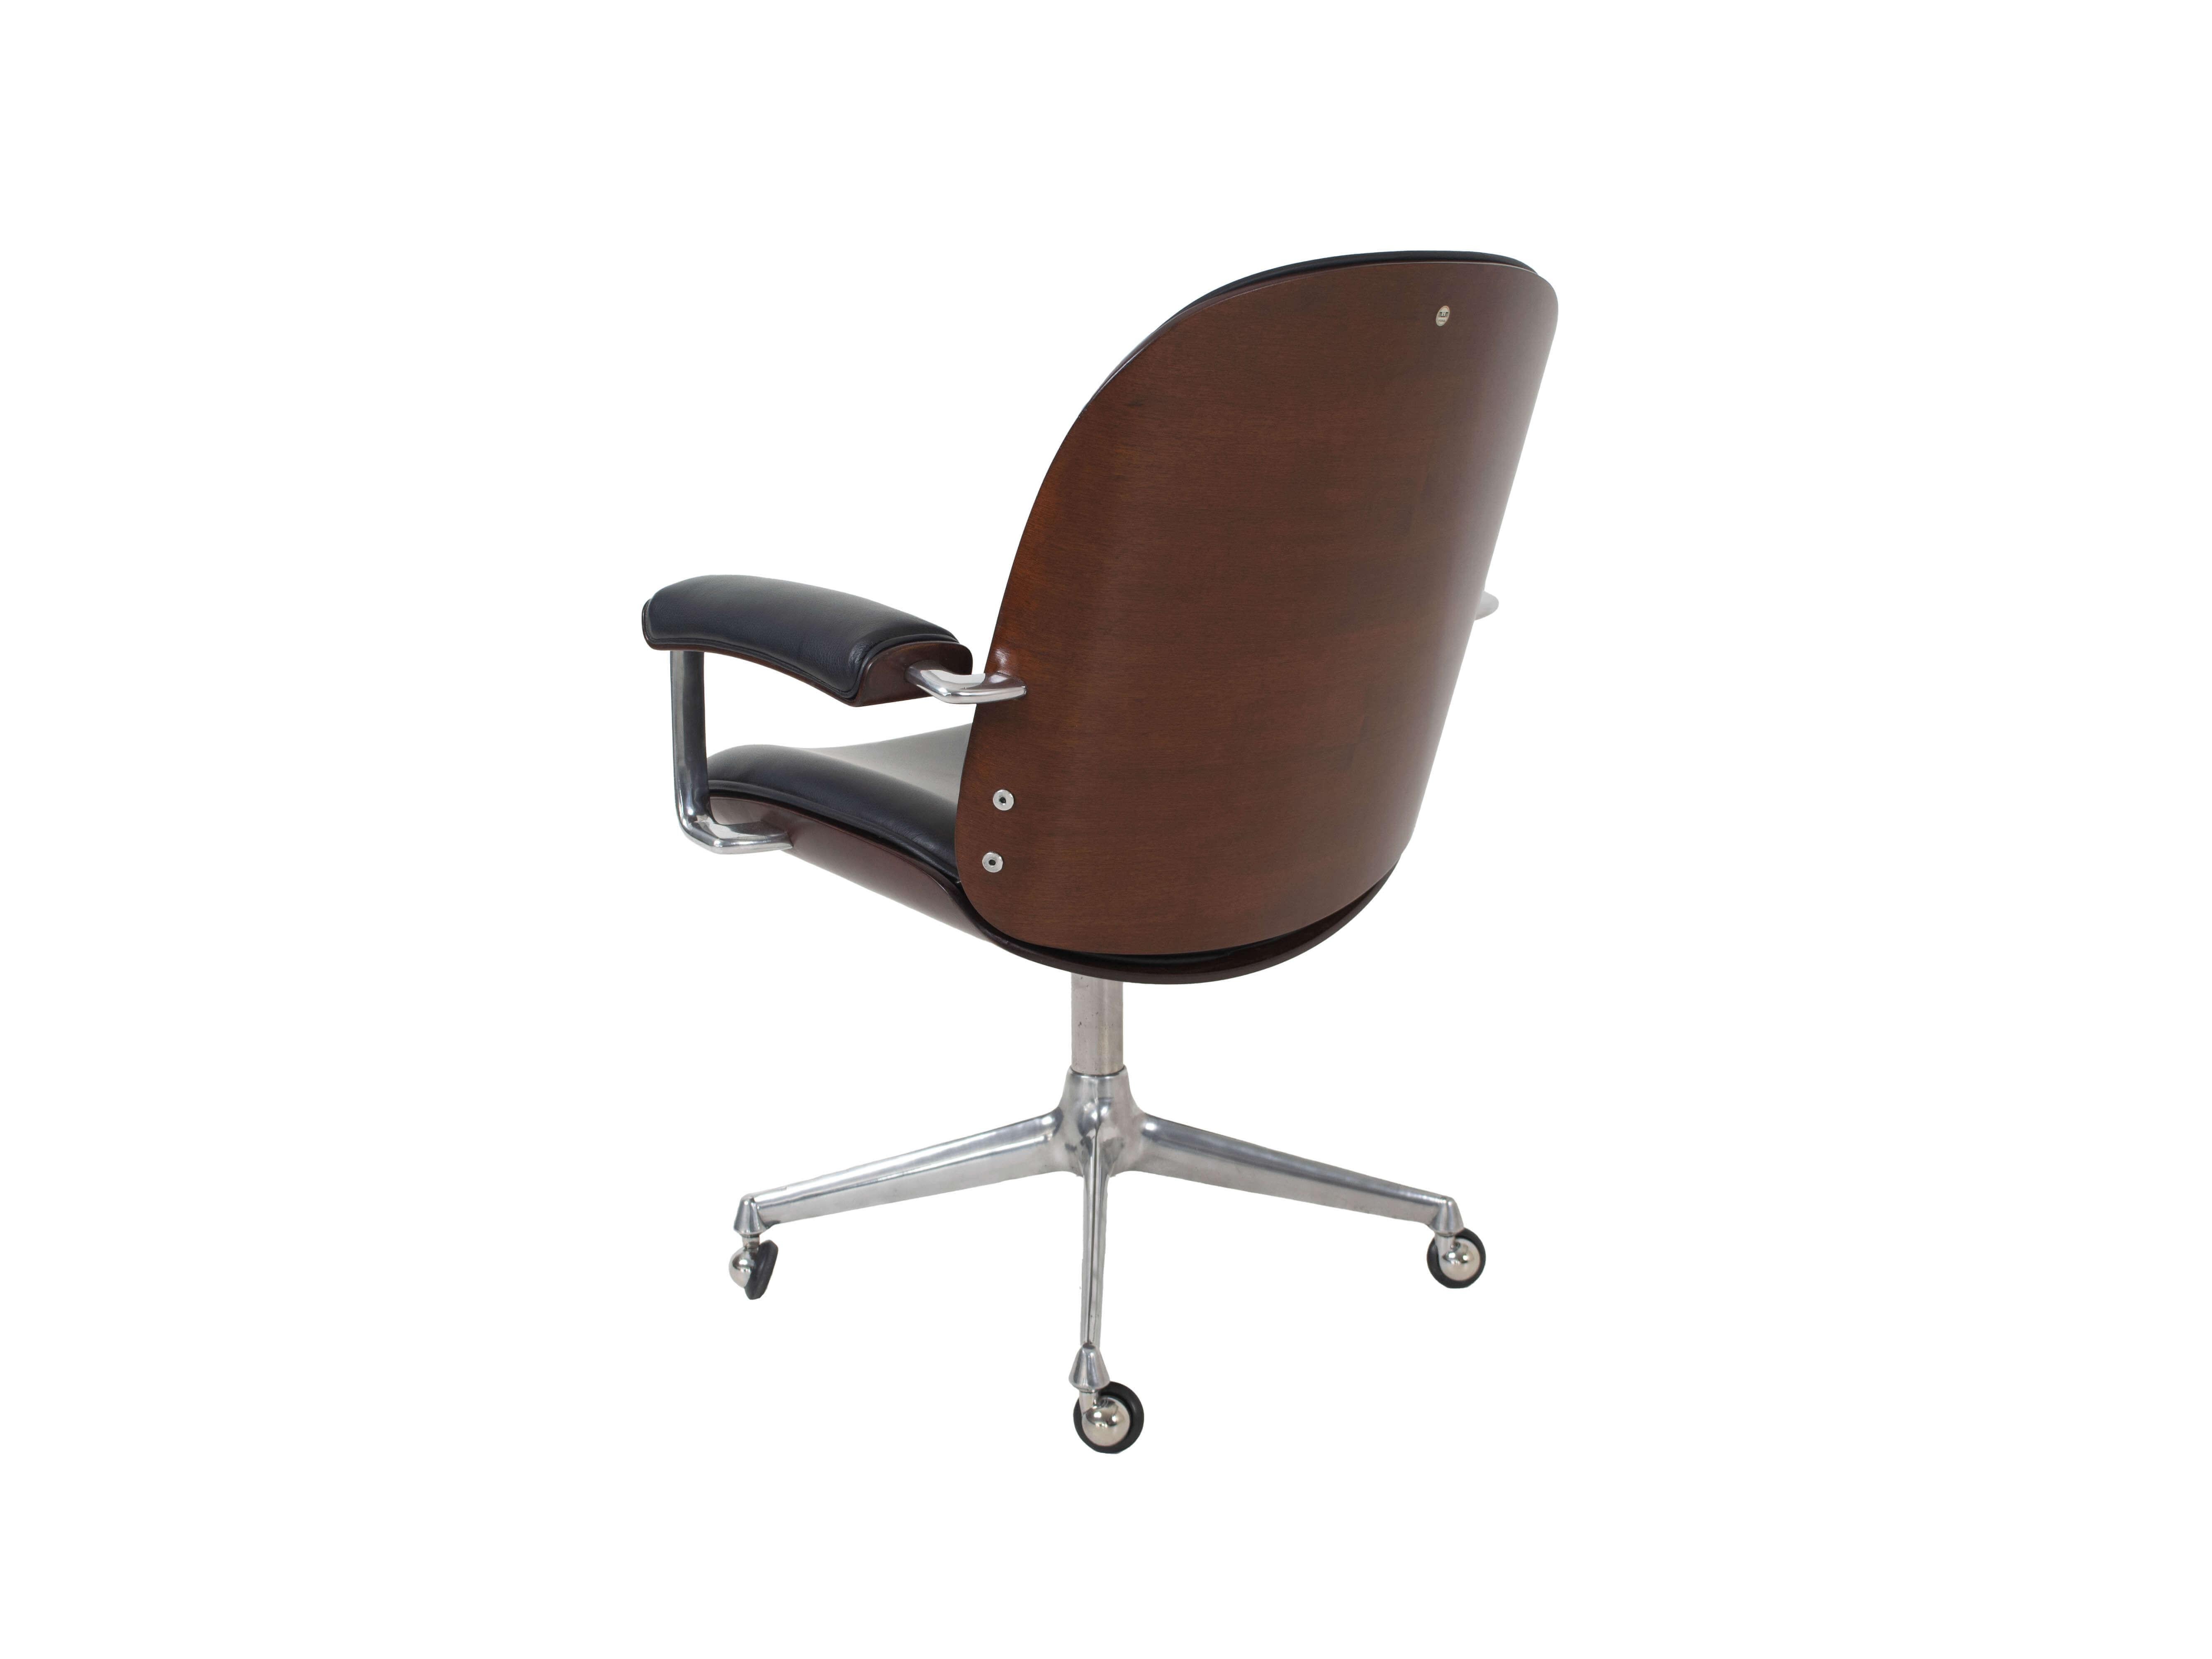 Mid-Century Modern Early Model Ico Parisi Desk Chair with Arm Rests by MIM Roma, Italy 1959